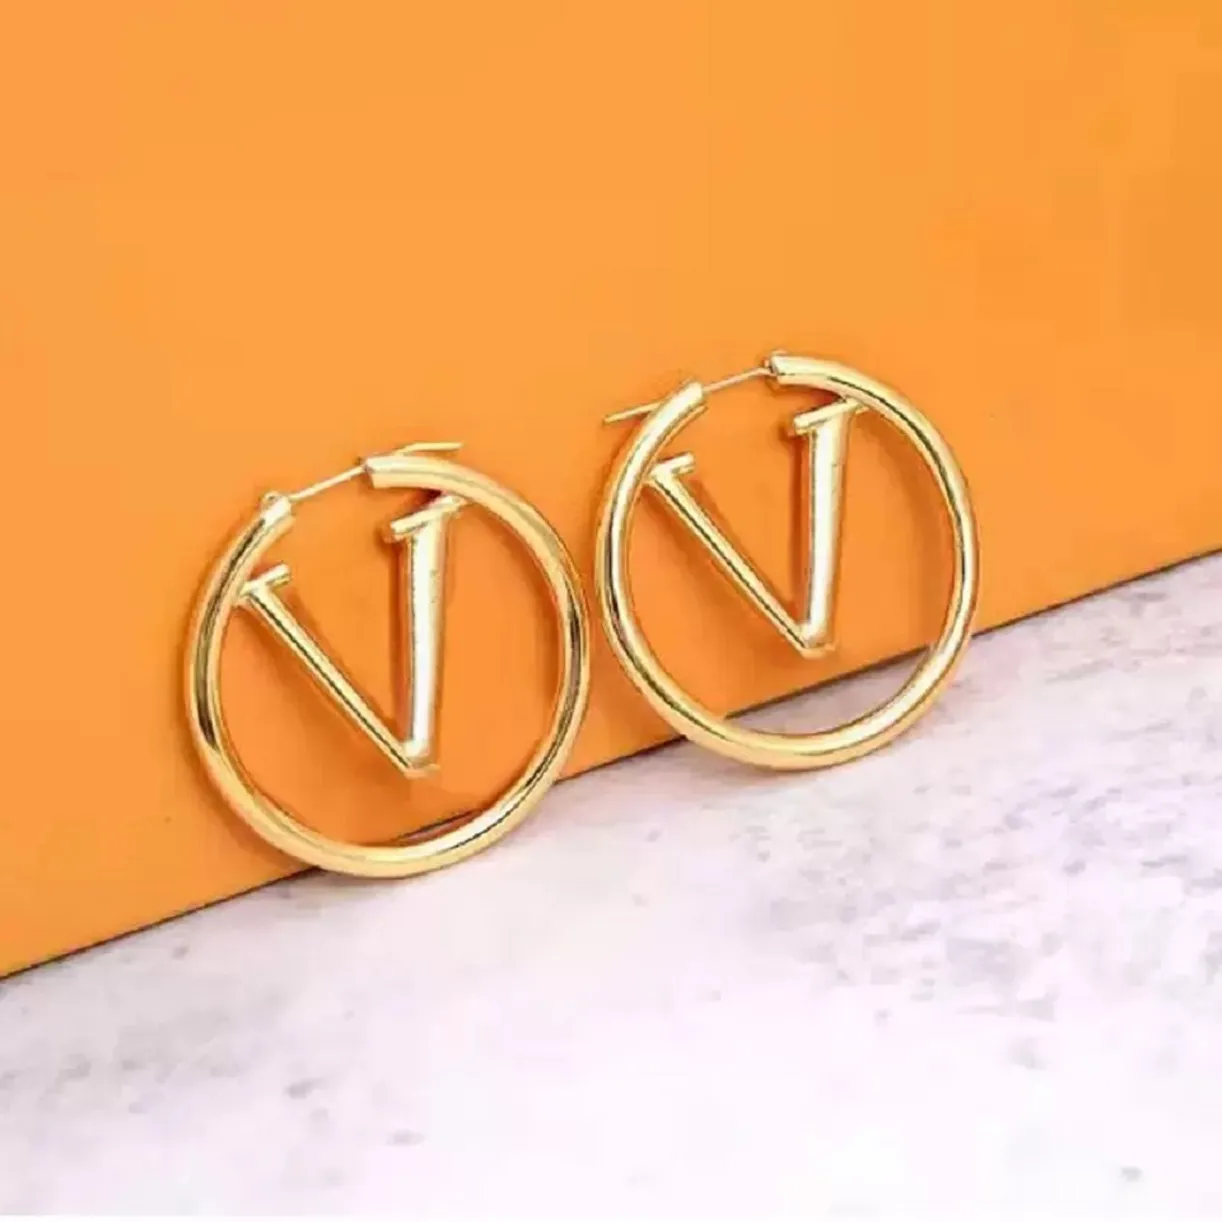 Fashion Hoop Earrings Stud for Womens letter jewelry studs Diameter 4cm Big Circle Simple Titanium Steel Earring for Woman gift